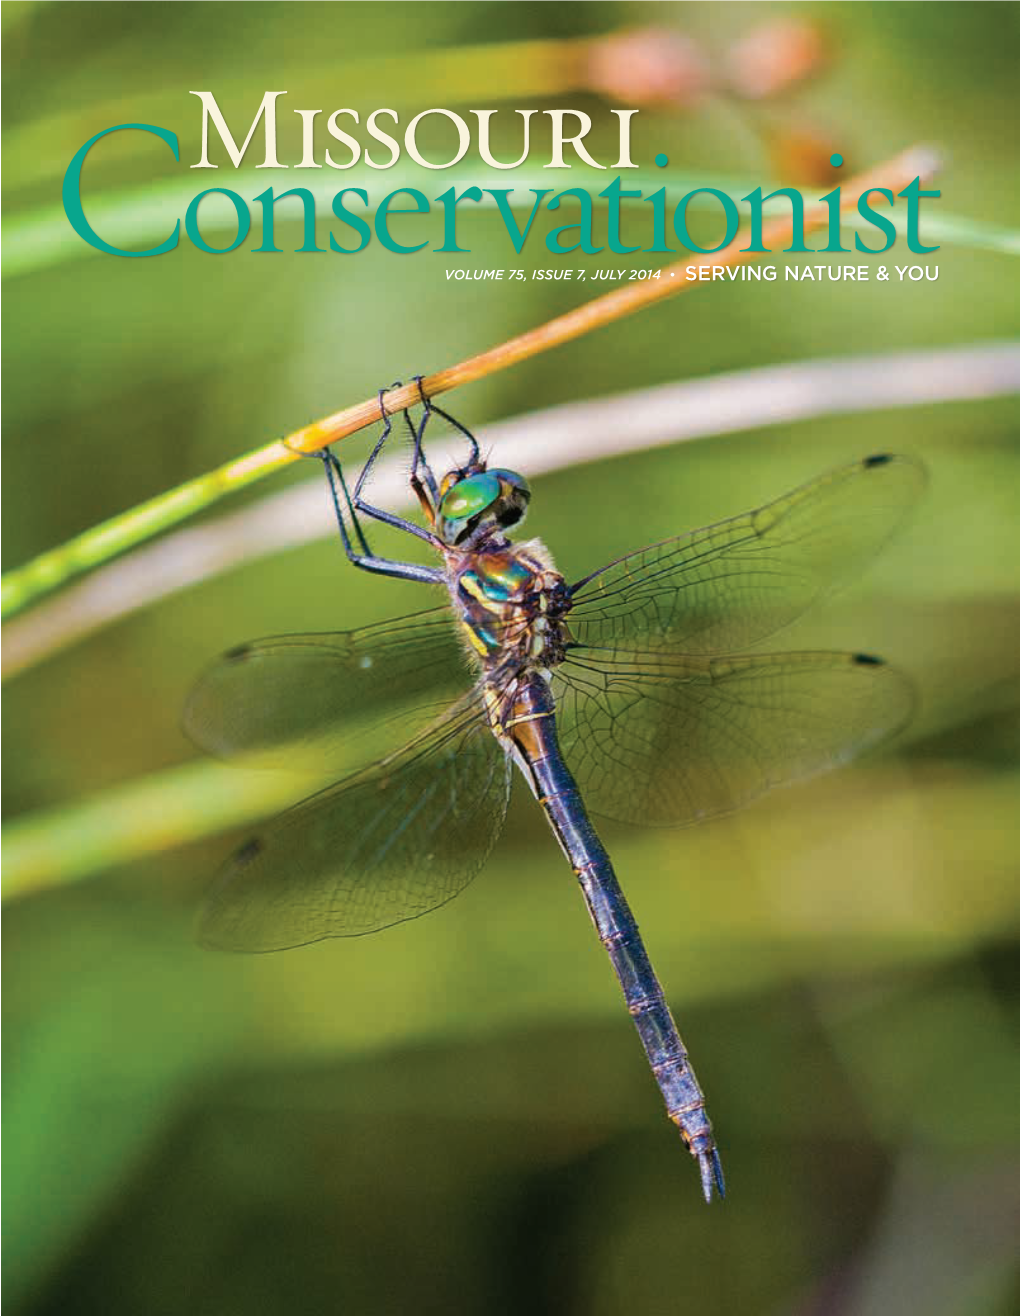 Missouri Conservationist July 2014 SUBSCRIPTIONS Phone: 573-522-4115, Ext